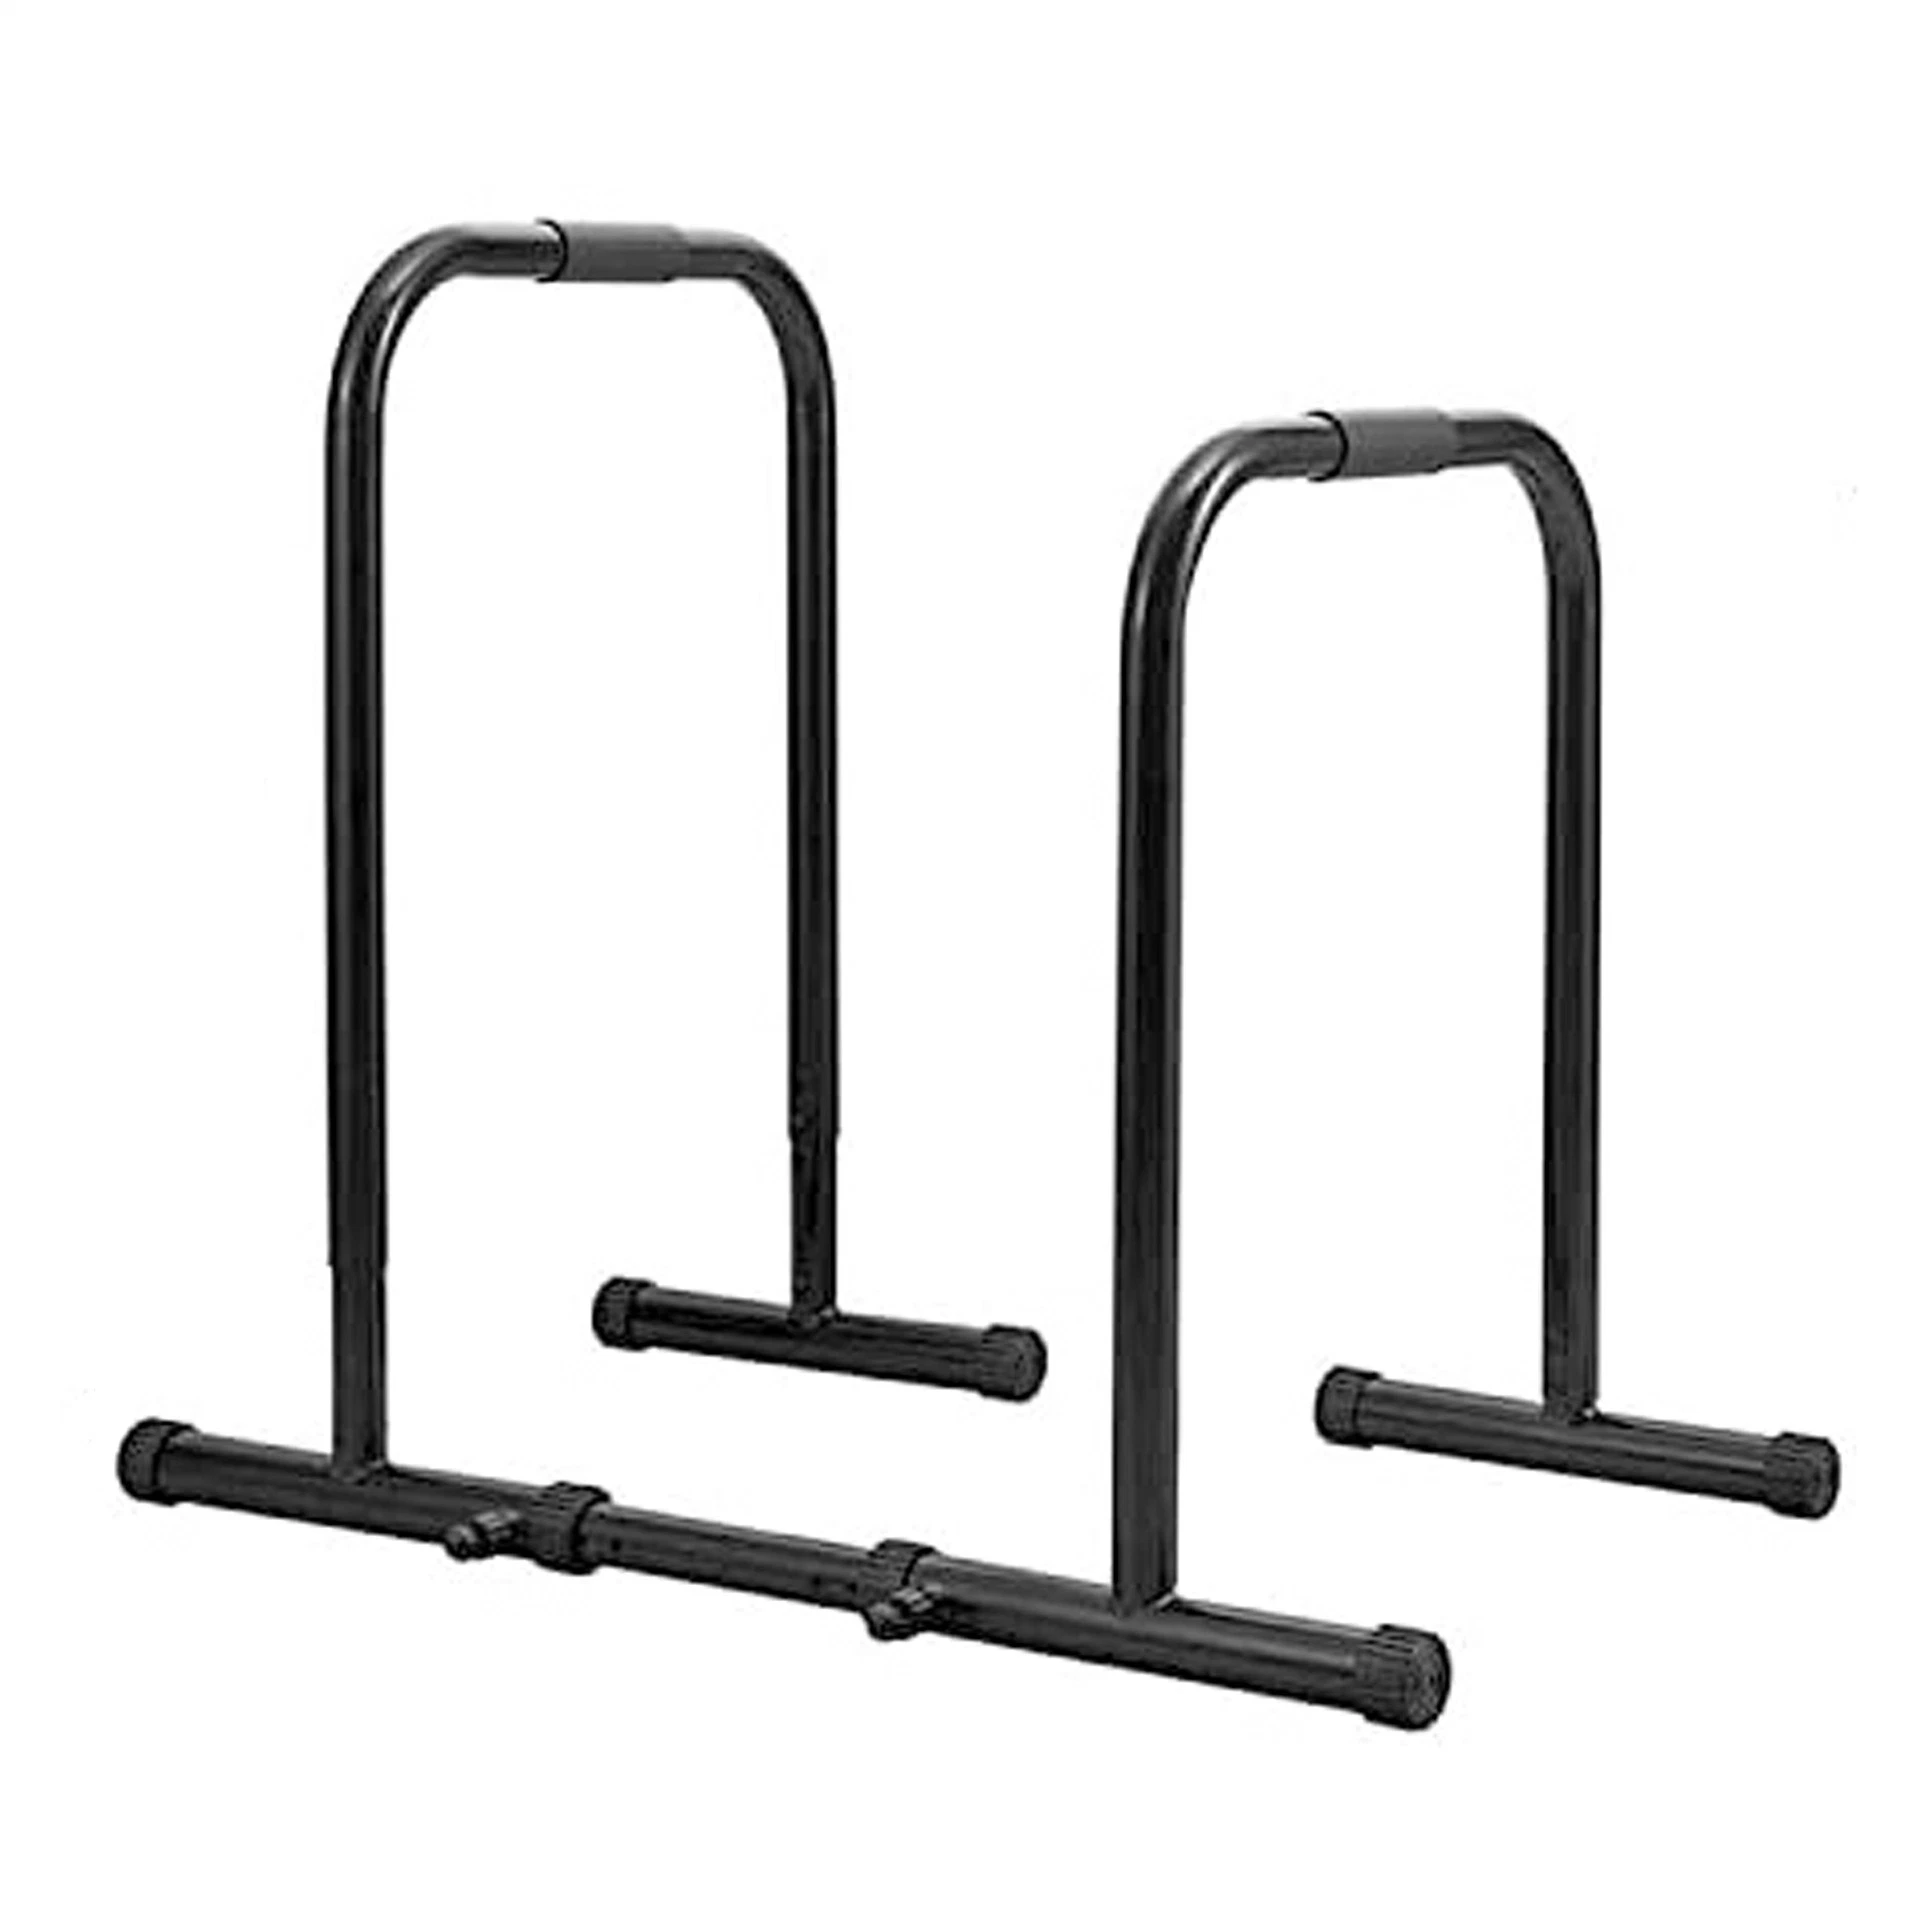 High quality/High cost performance Fitness Exercise Tool Push-up Bar with Foam Handle H-Shaped Push-up Grips Push up Stands Bars